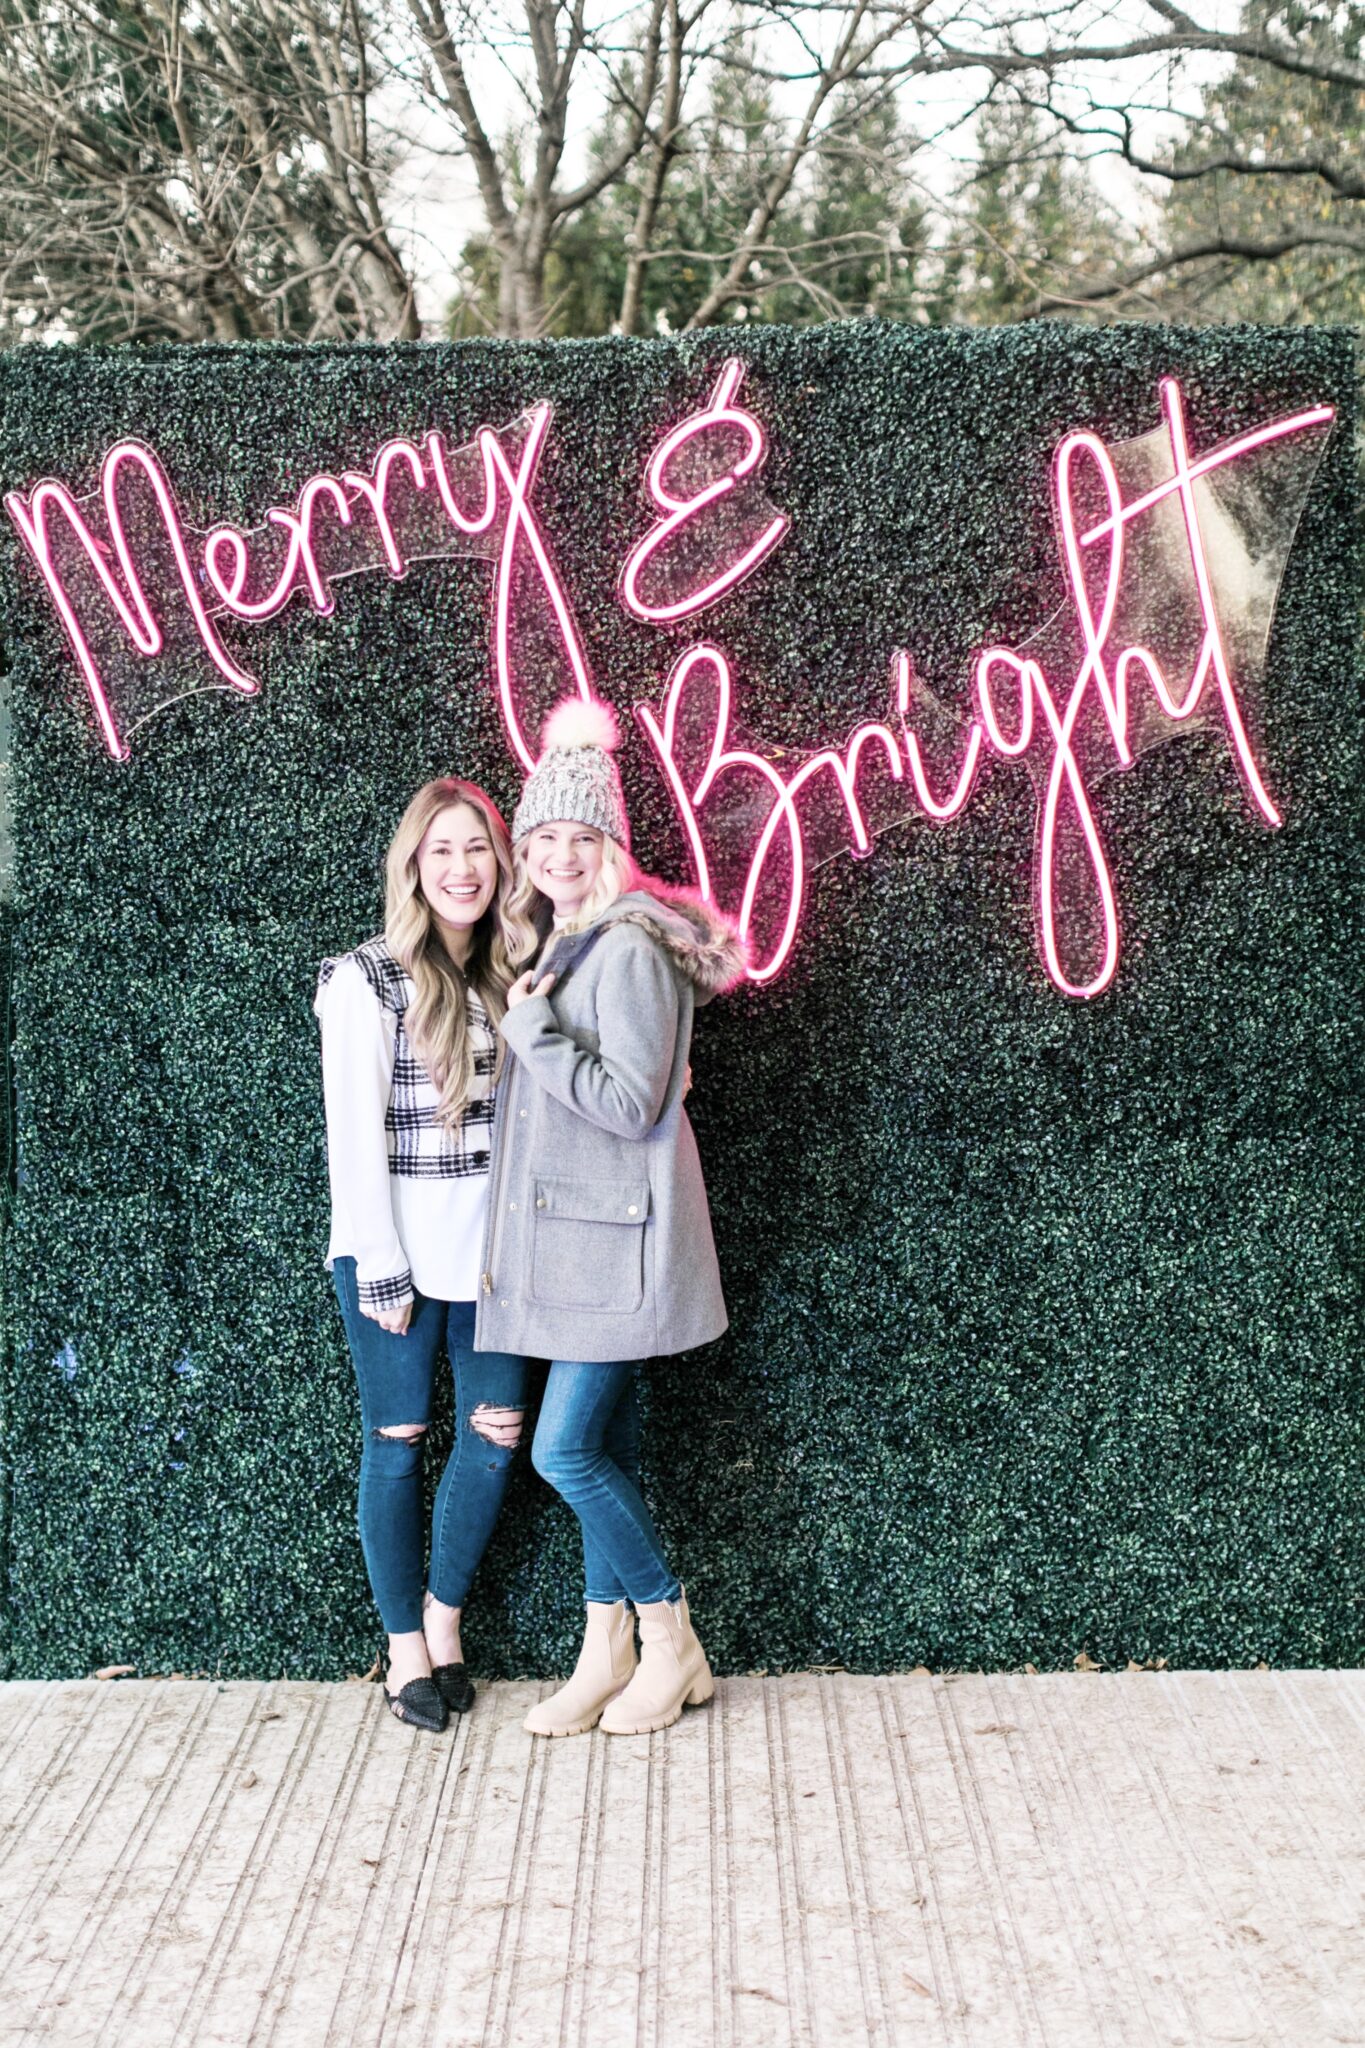 11 Places to Visit during the Holidays in Memphis, TN featured by Walking in Memphis in High Heels.